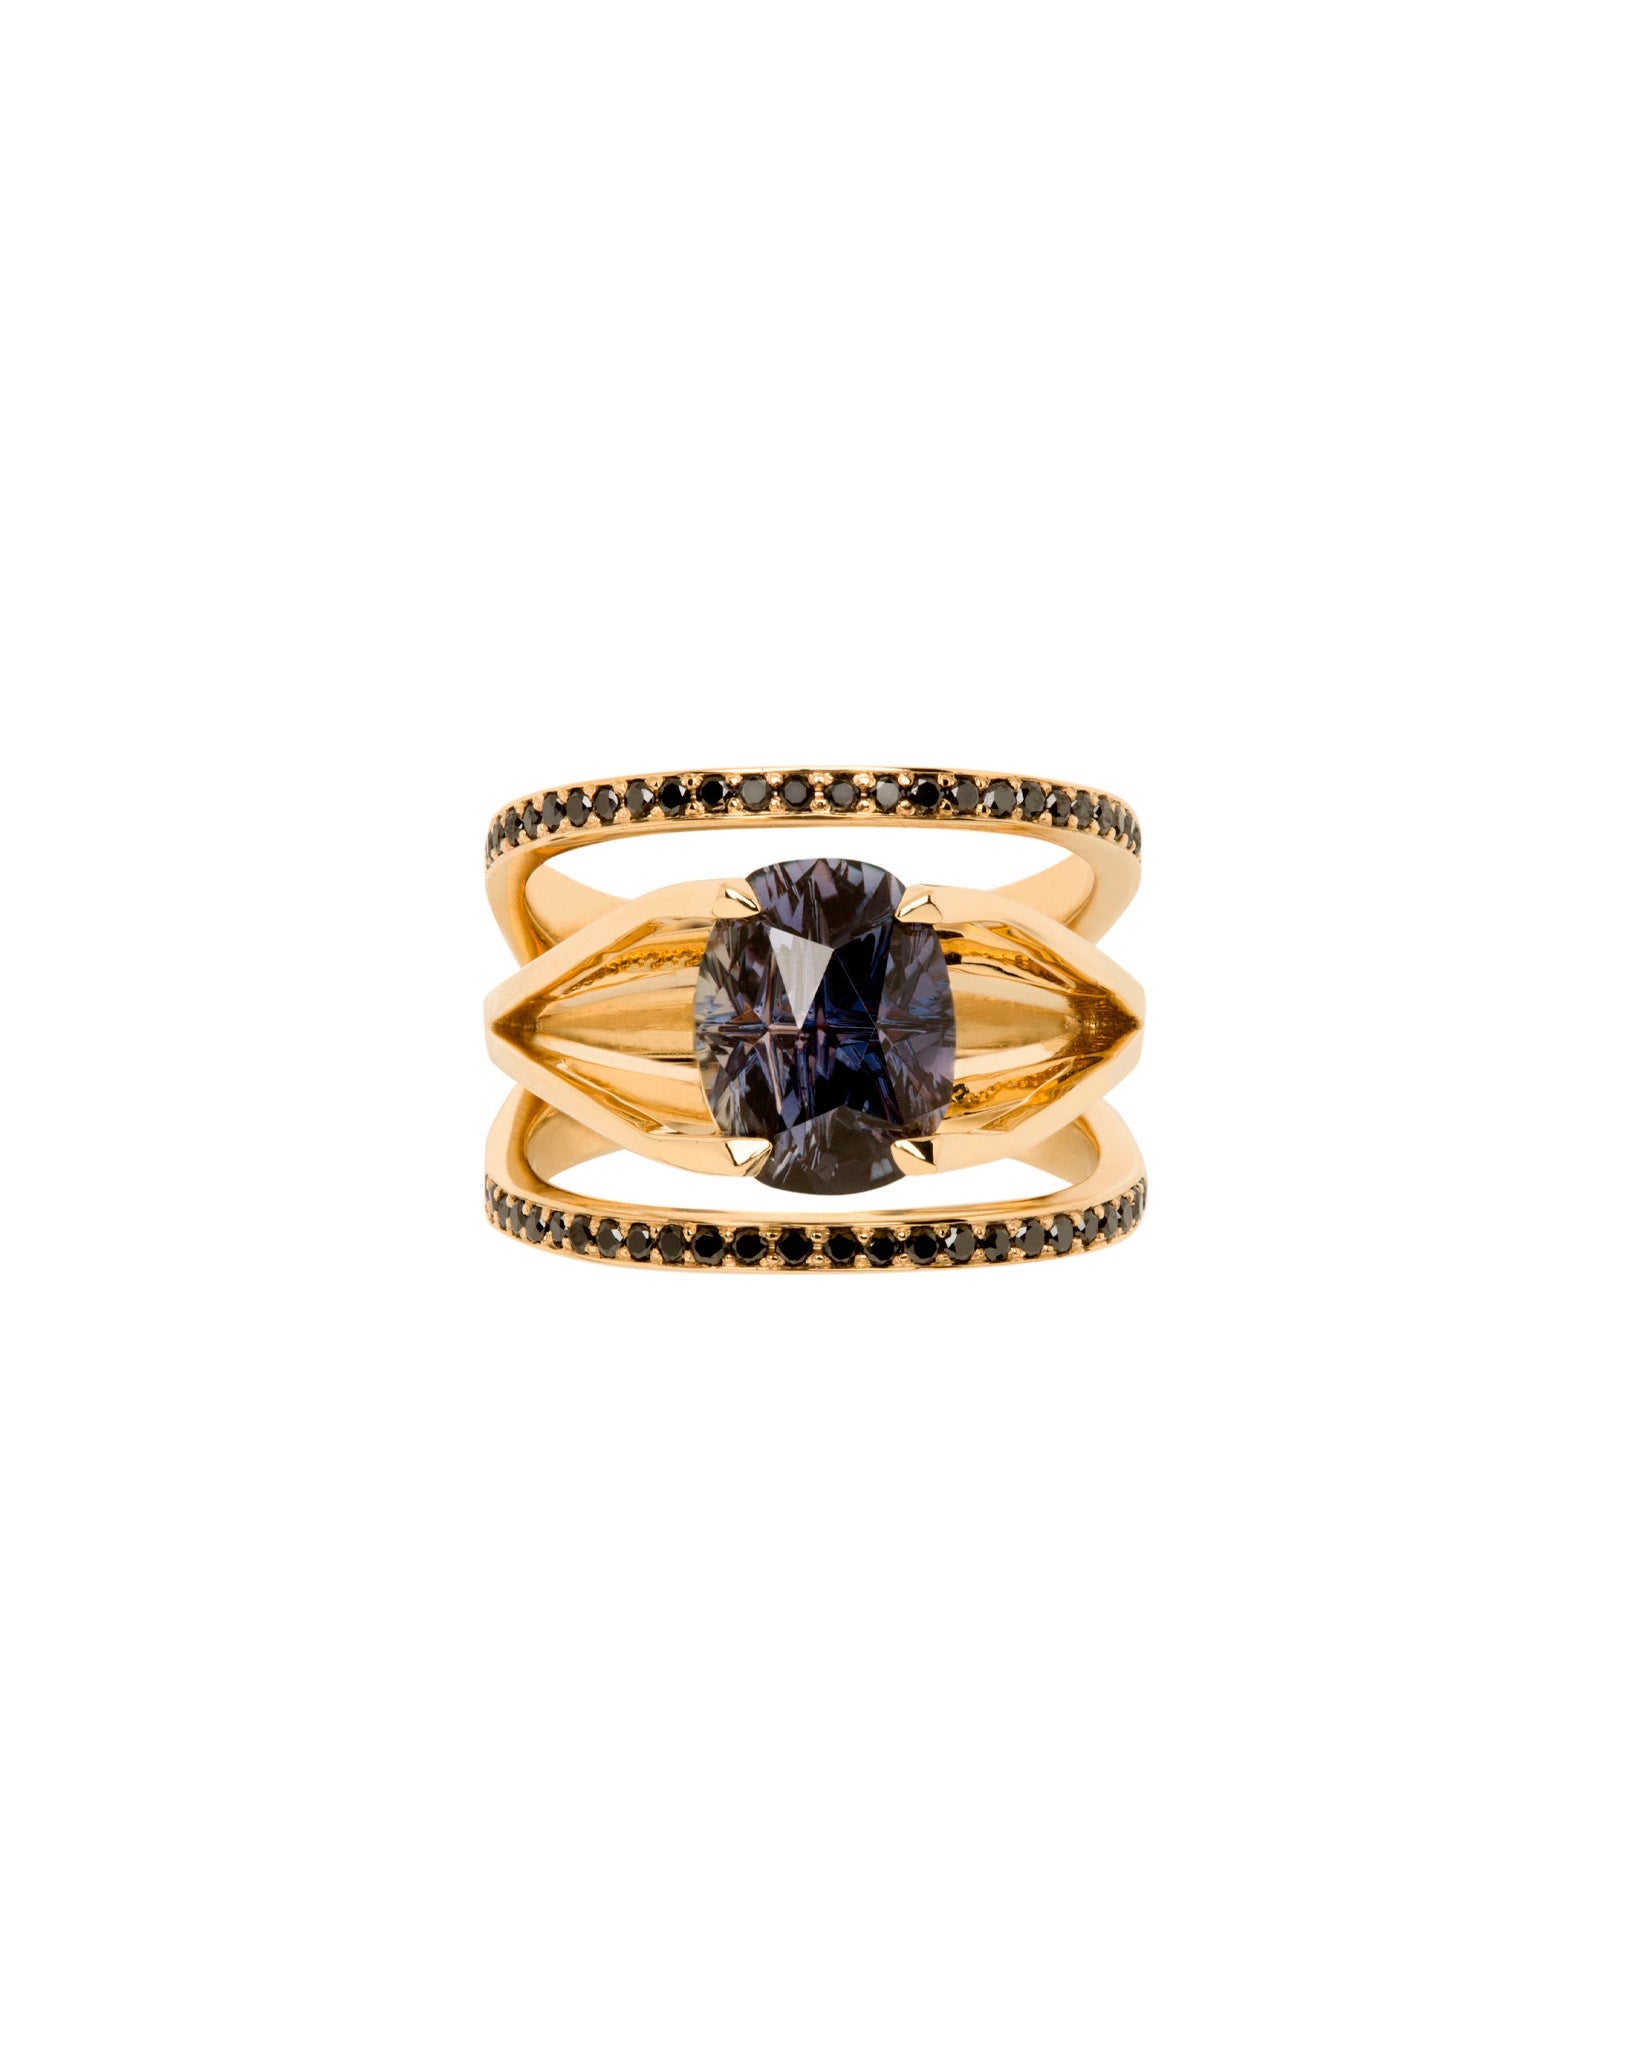 Bliss La acute 13mm enclose and centered ring black 